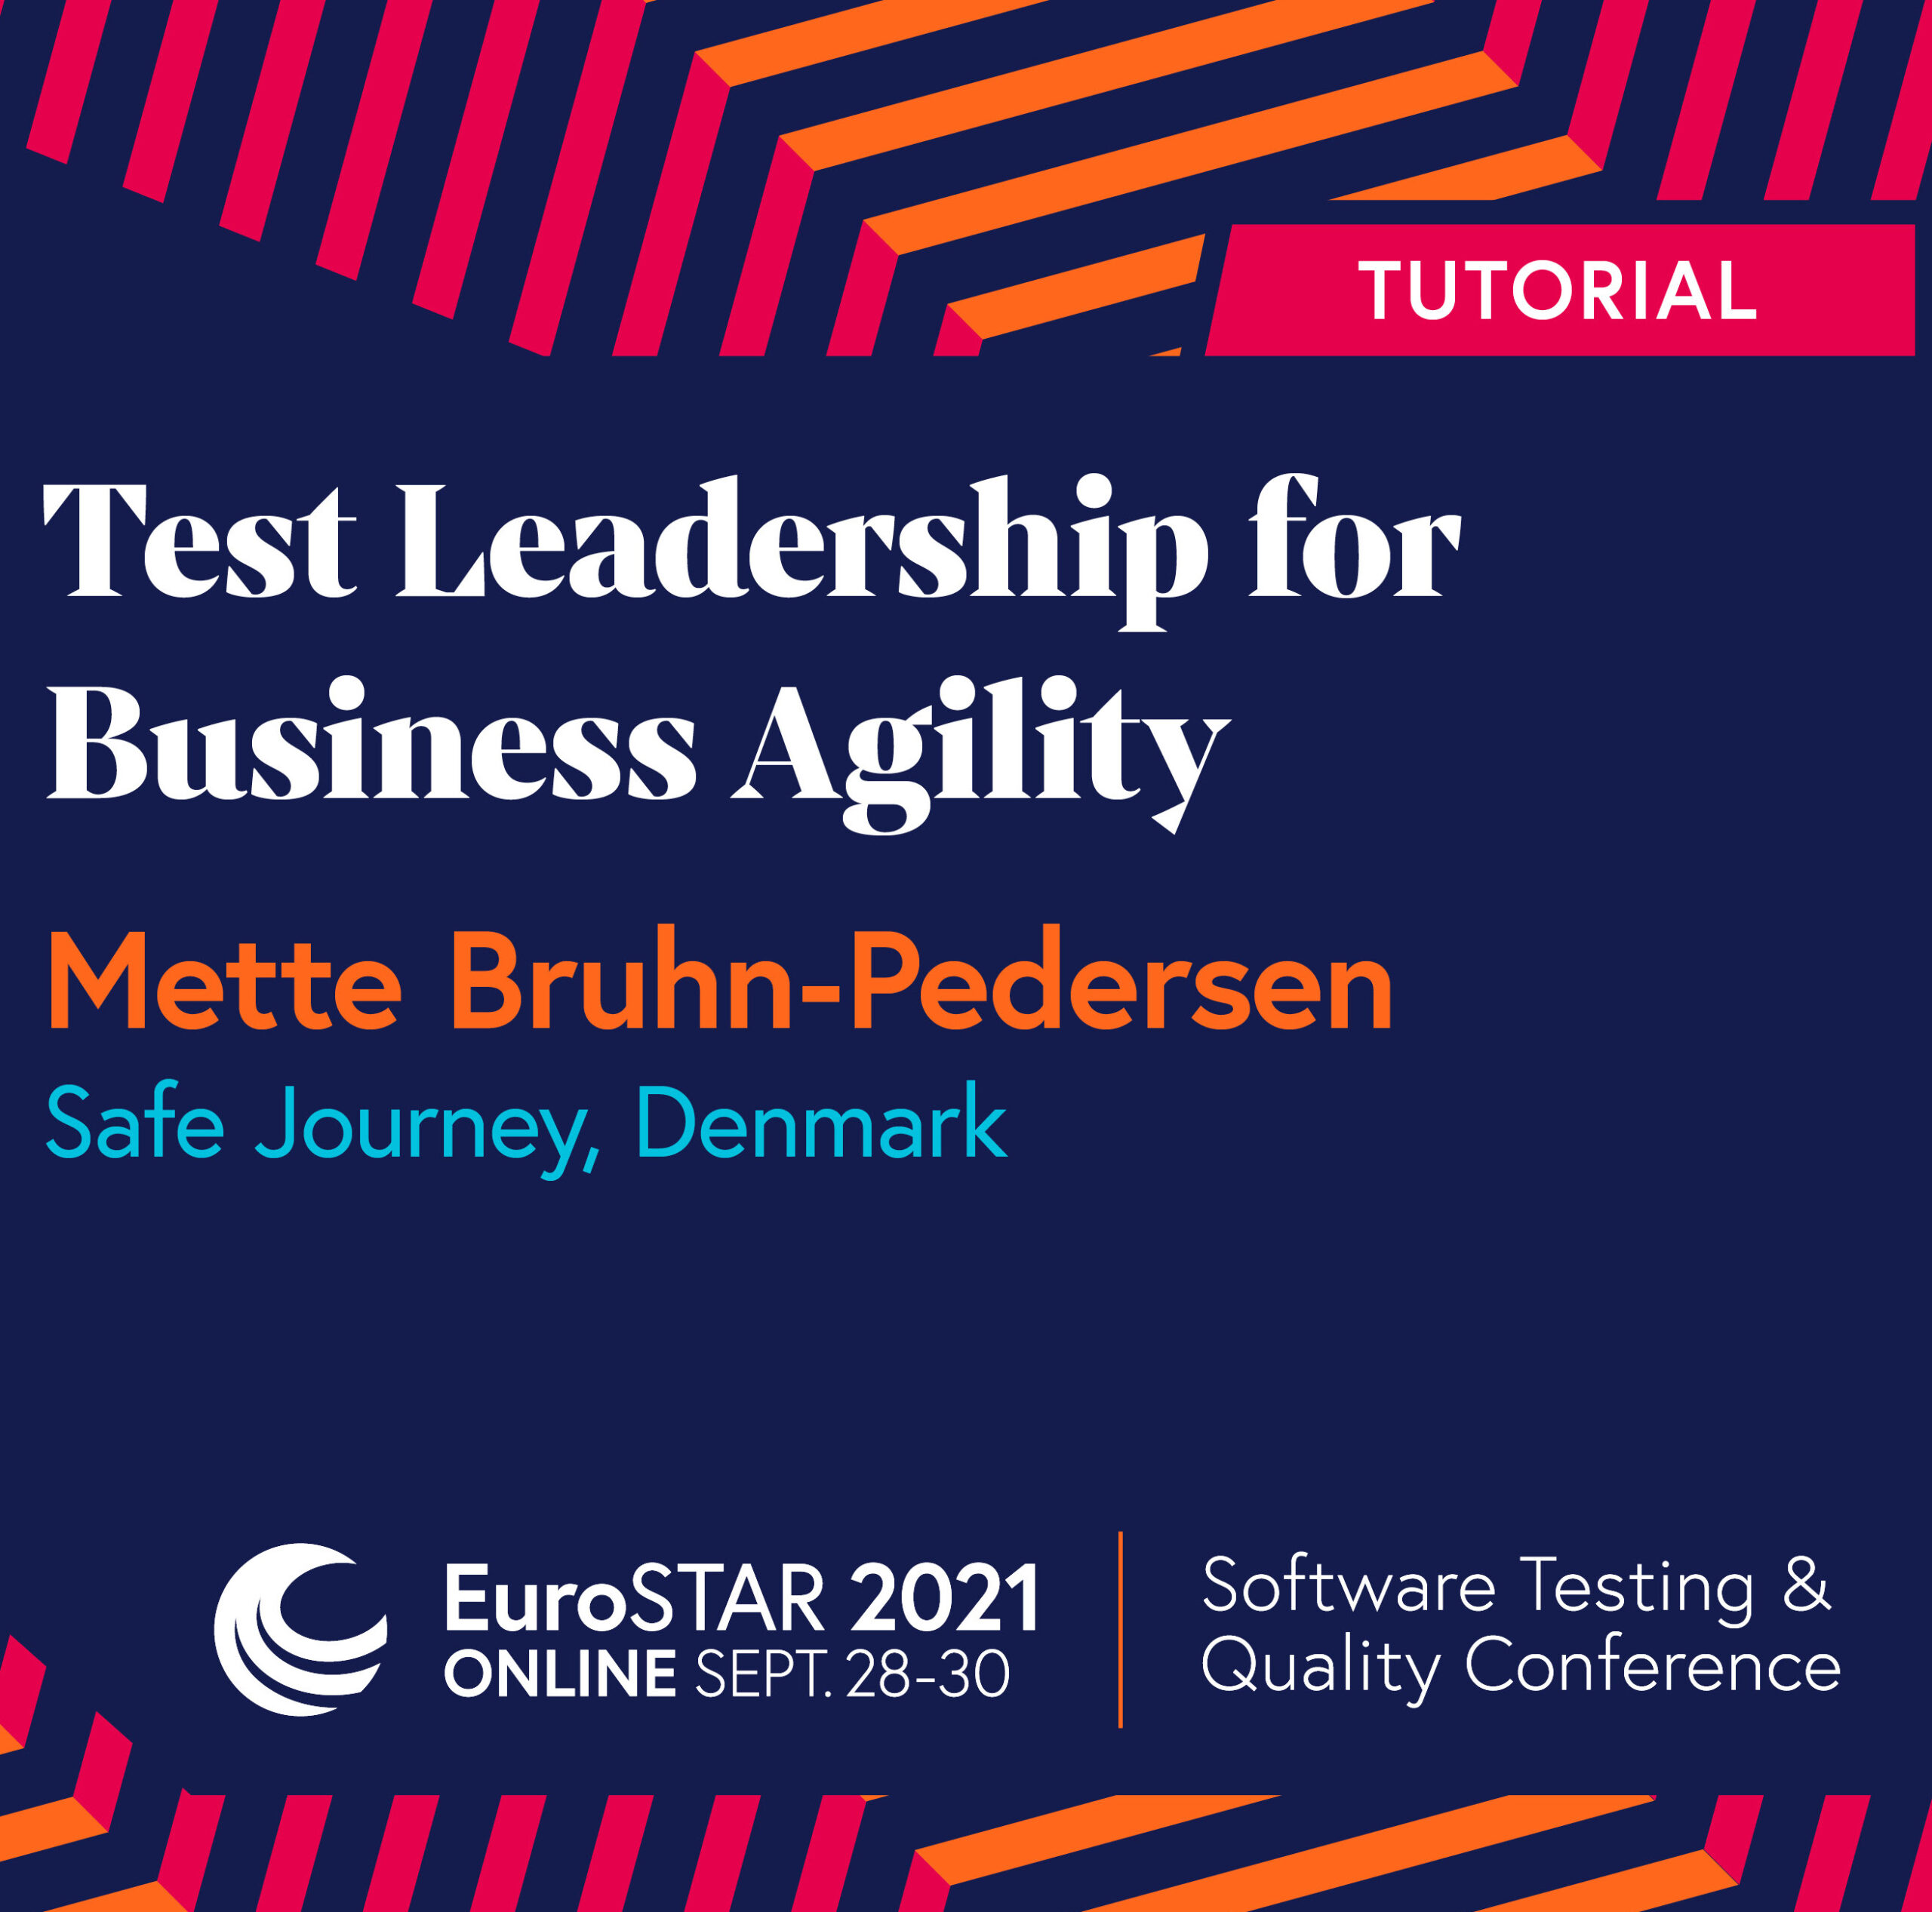 Tutorial about Test Leadership for Business Agility